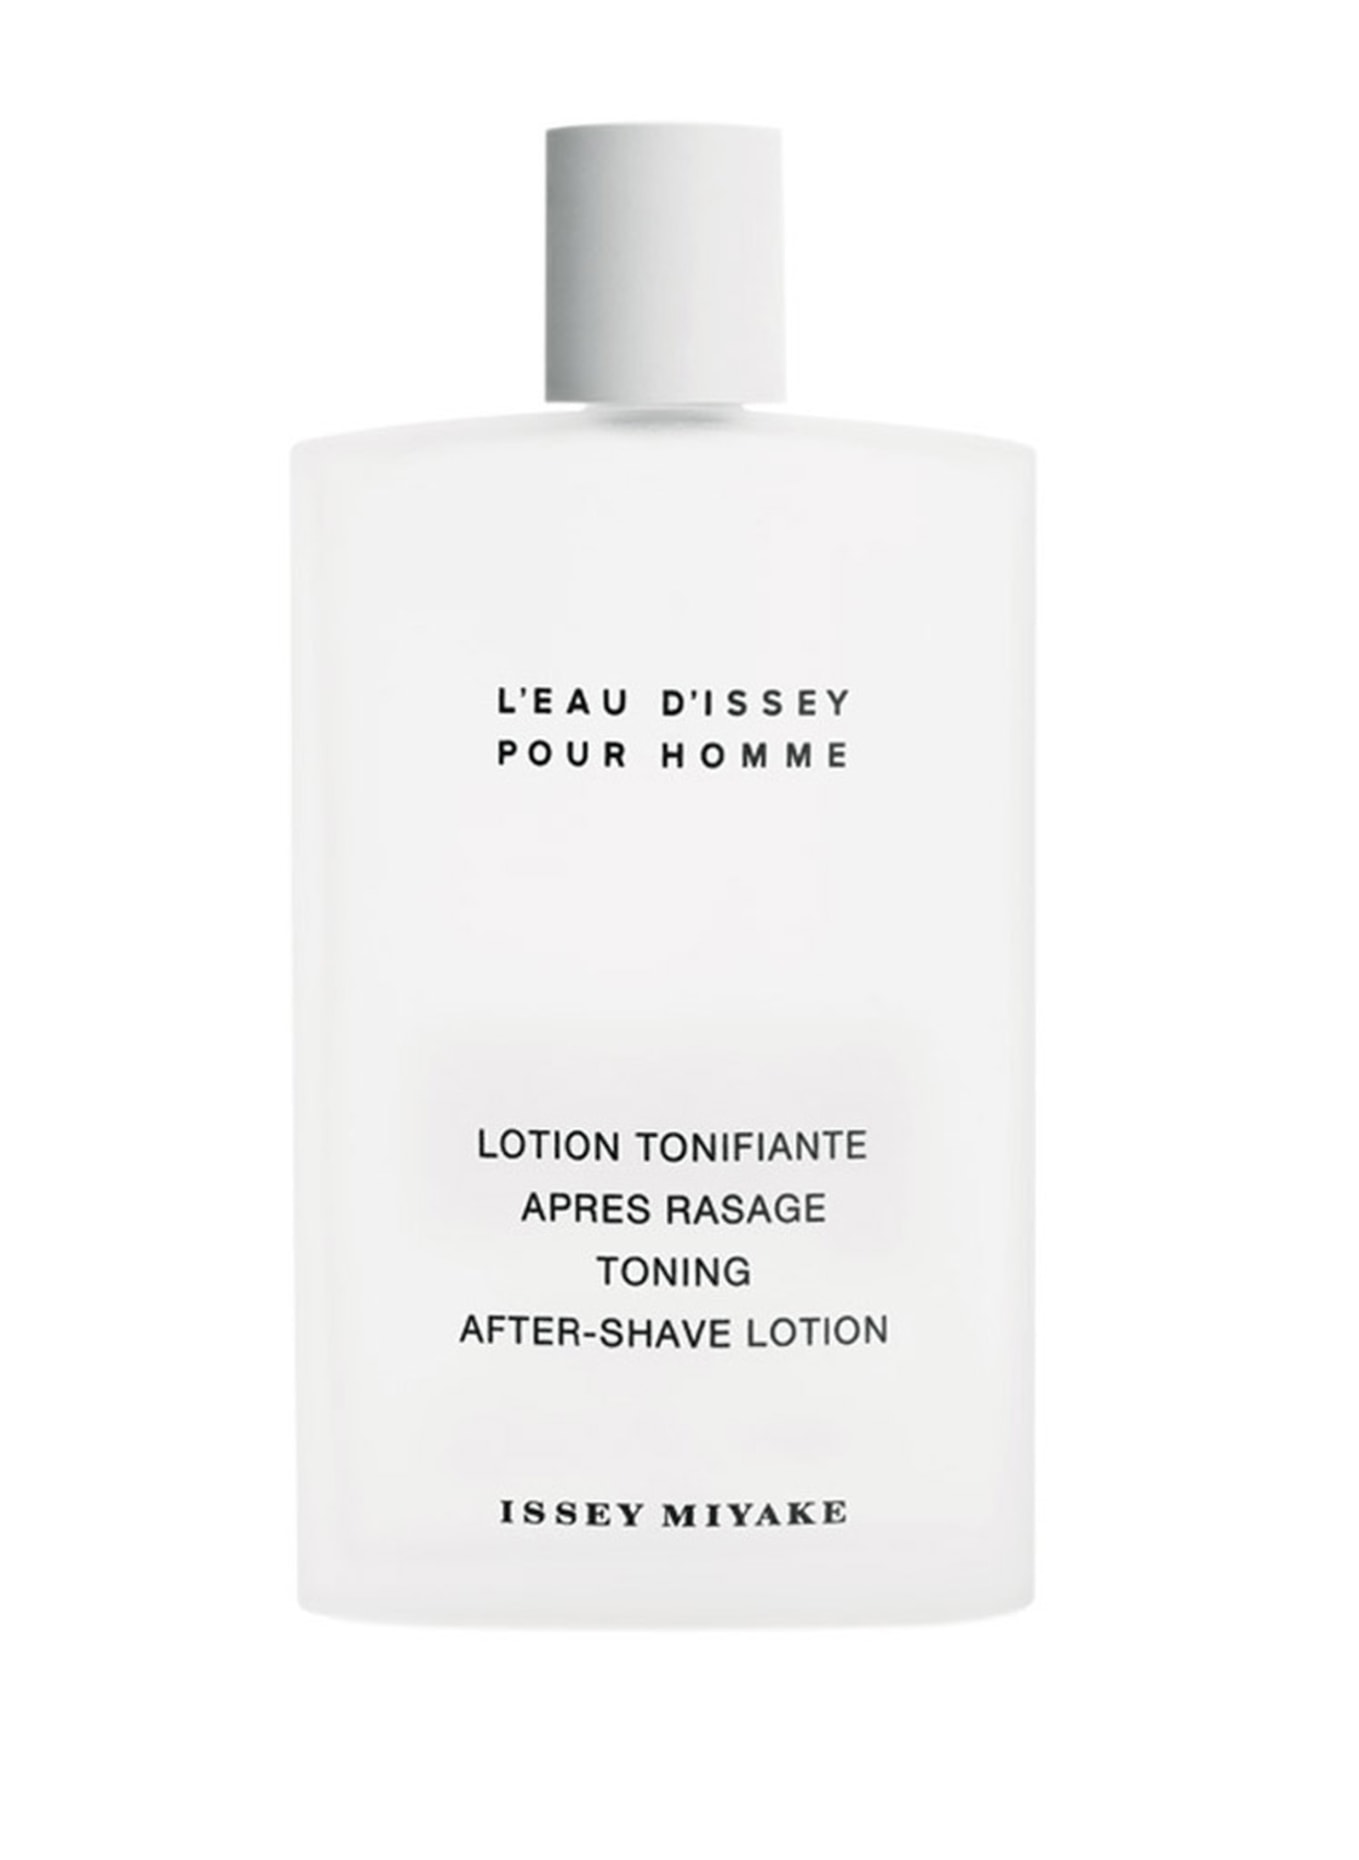 ISSEY MIYAKE L'EAU D'ISSEY POUR HOMME (Bild 1)